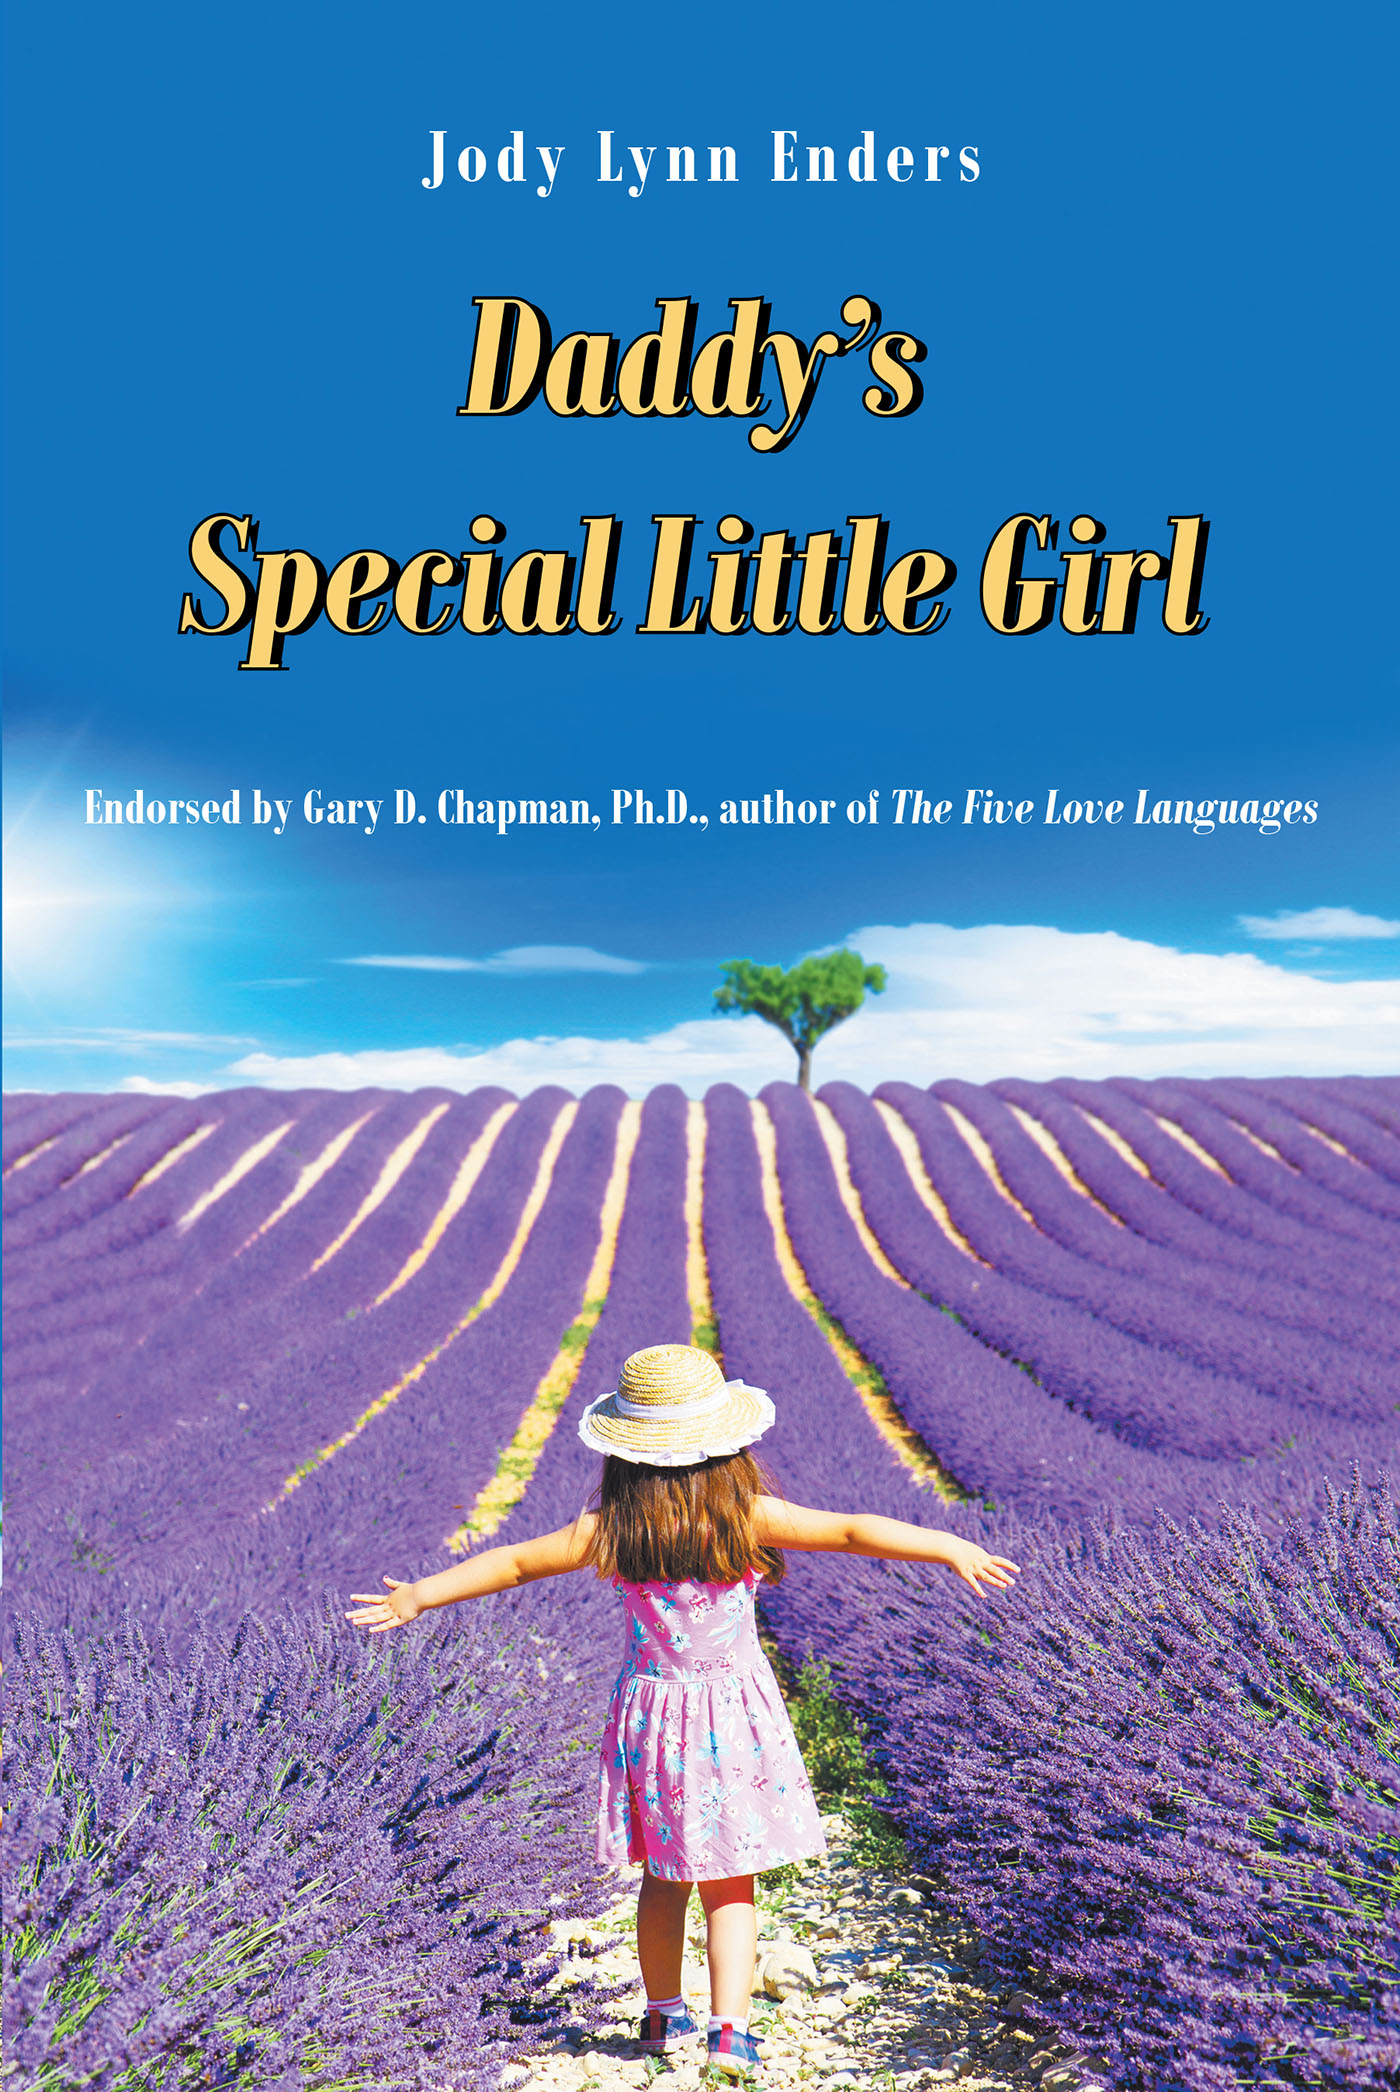 Jody Lynn Enders’ Newly Released "Daddy’s Special Little Girl" is a Powerful Story of a Family’s Torment and Healing Following Ongoing Childhood Abuse